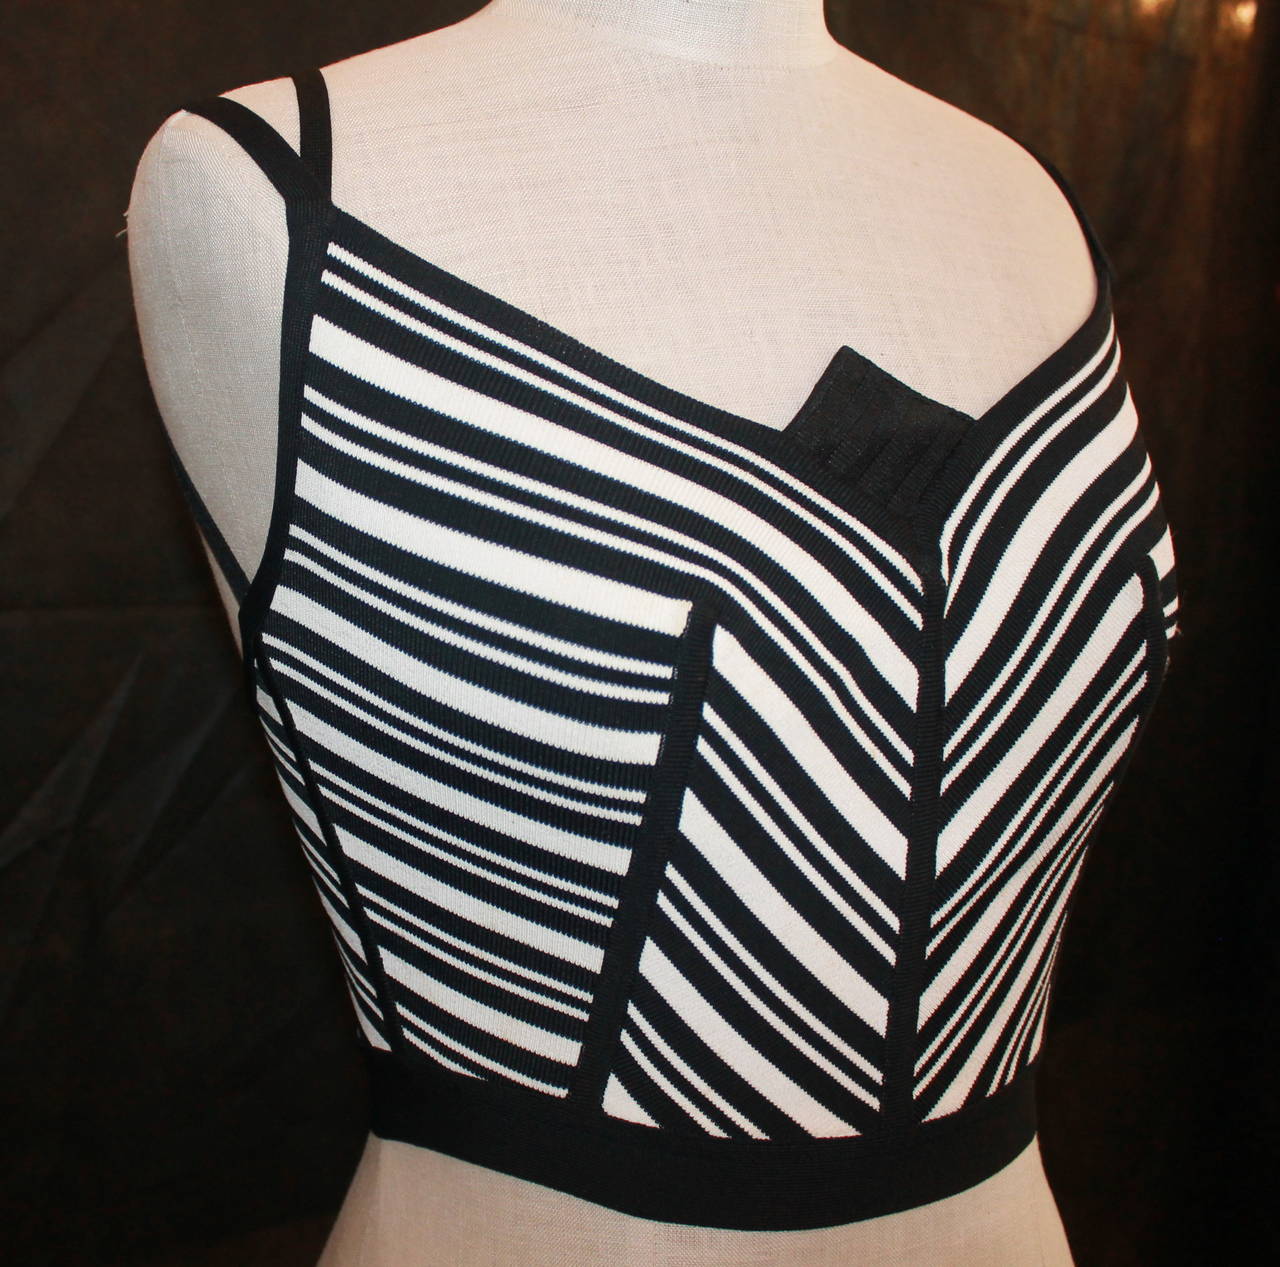 Herve Leger Vintage Black & White Bandgage Crop Top - S. This top is in excellent vintage condition with very minor signs of wear. Circa 1980s. 

Measurements:
Bust- 28"
Waist- 23"
Length (back to hemn)- 5.5"